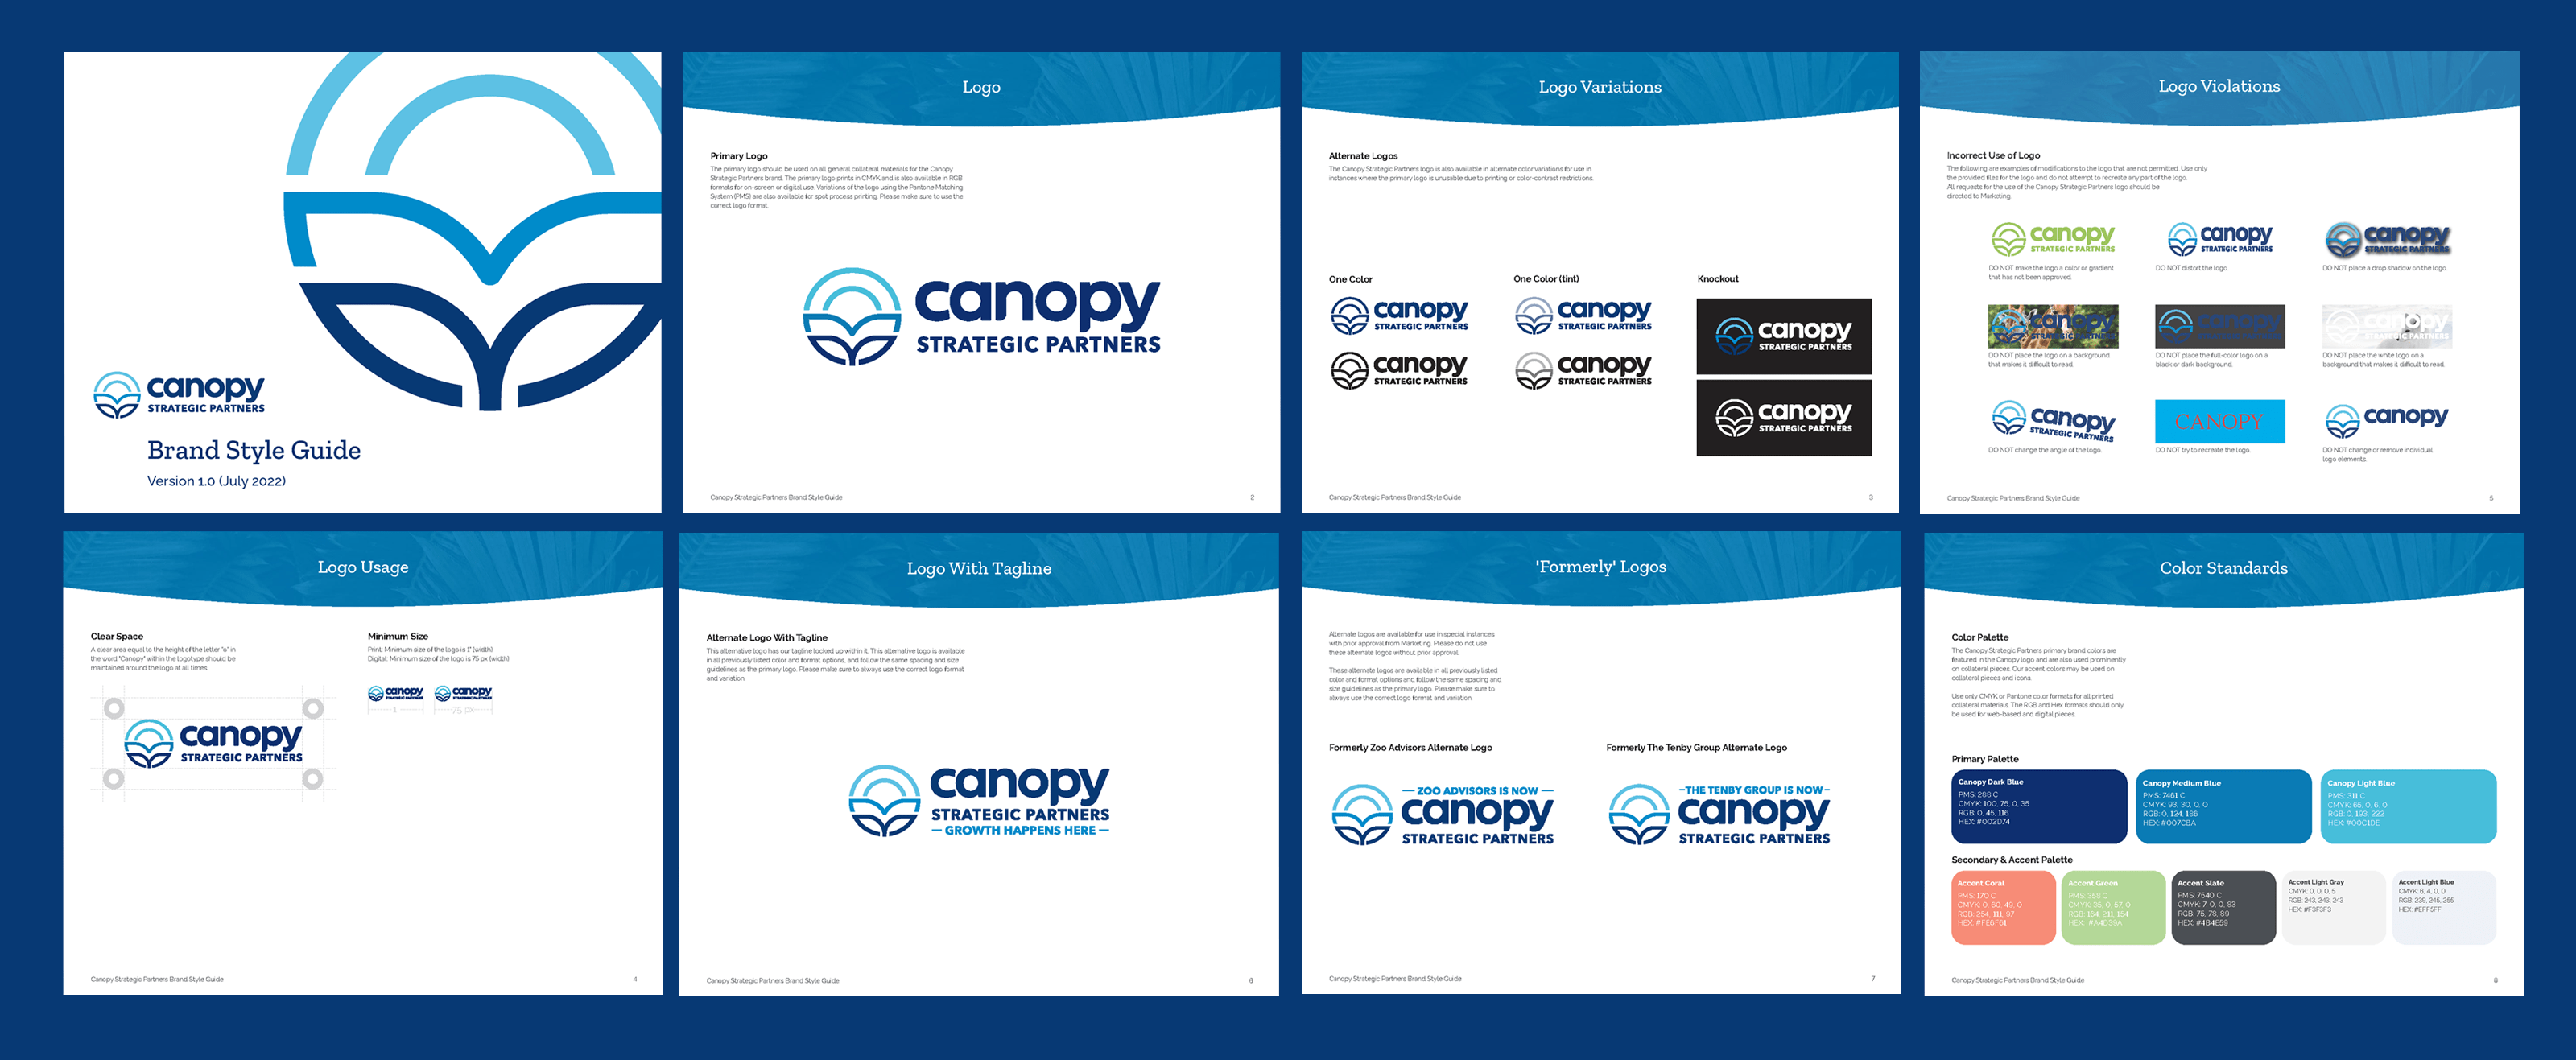 Canopy Strategic Partners Brand Guidelines Mockup Containing a few pages shown in detail